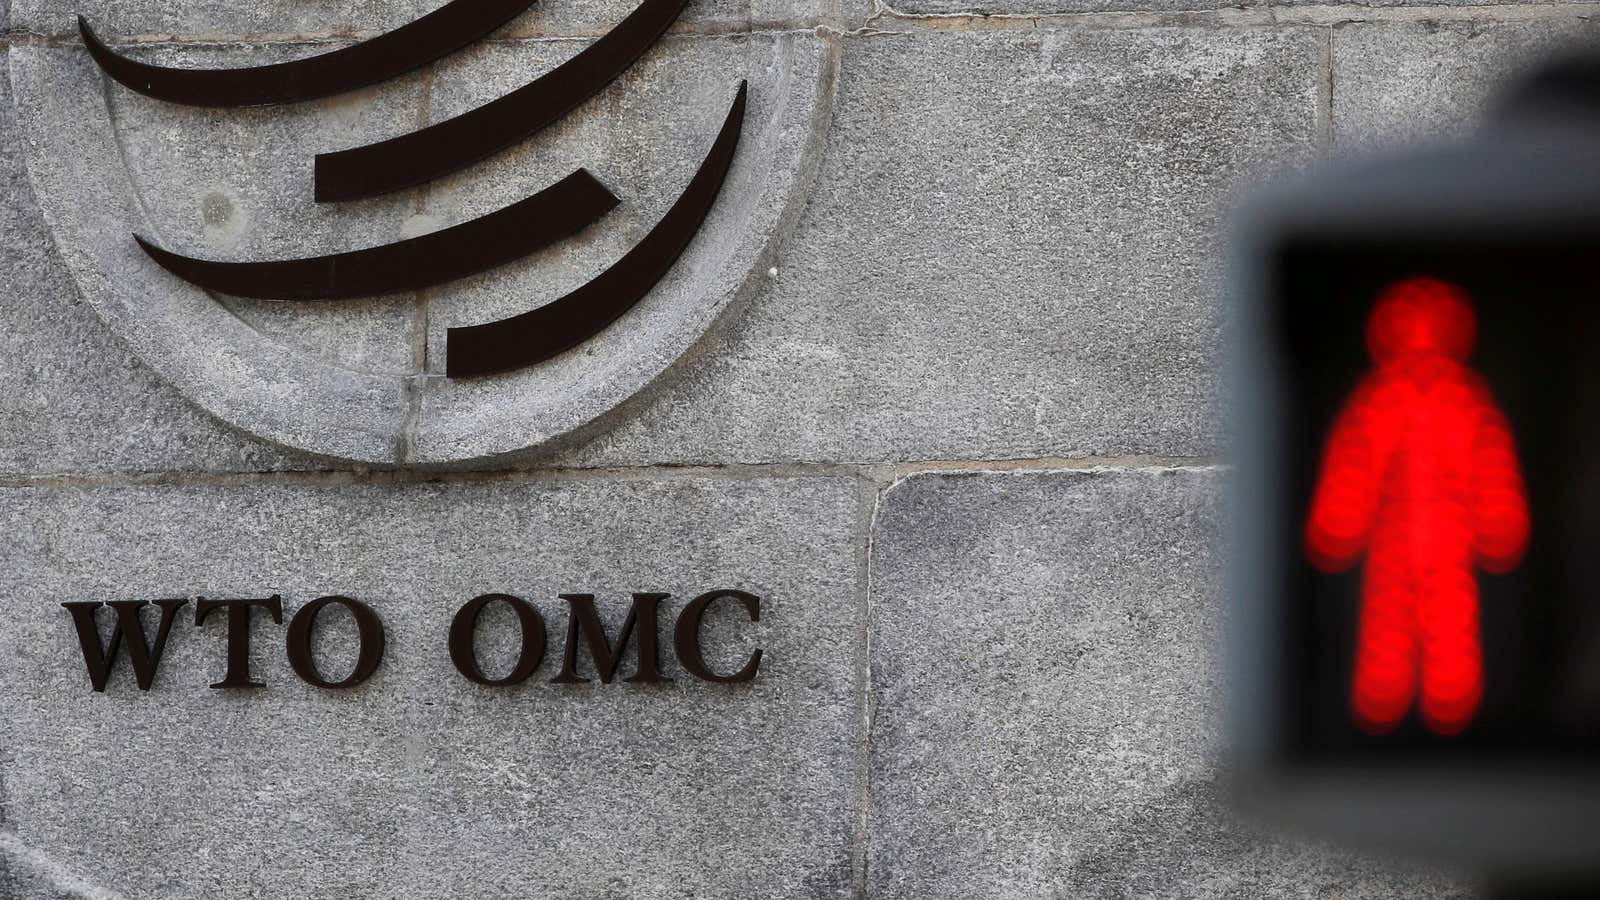 How to get the WTO moving again?